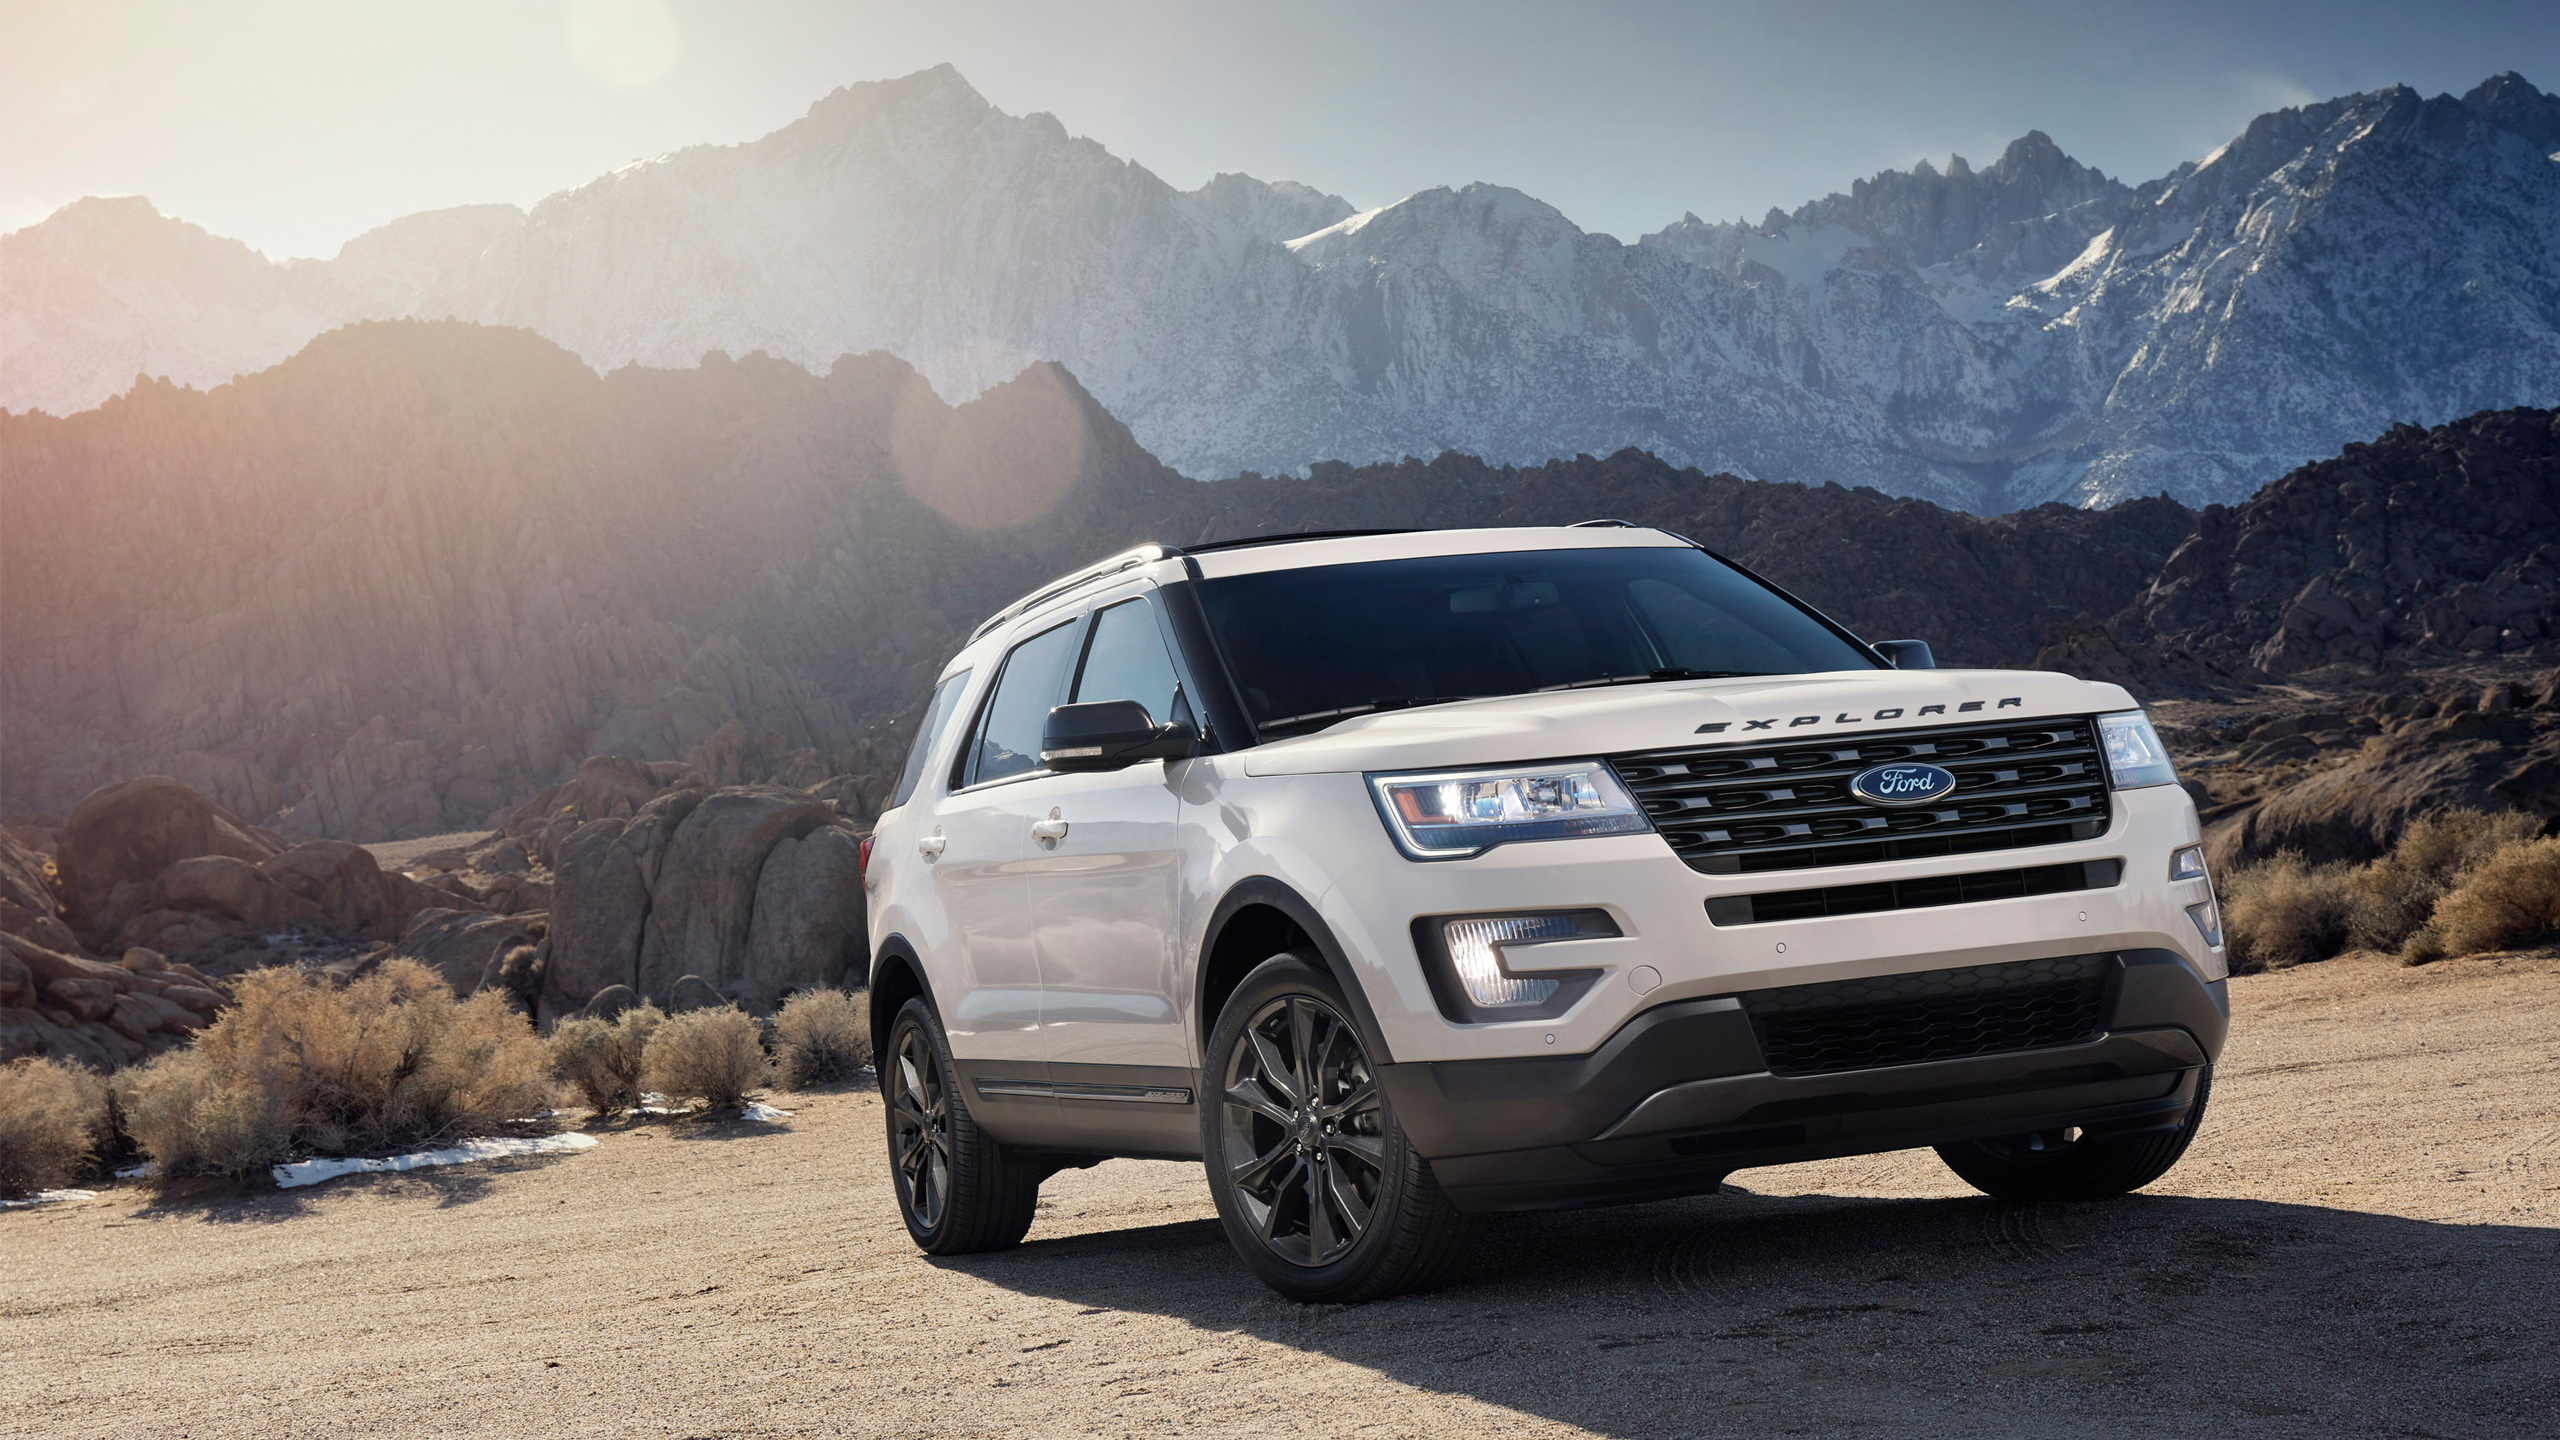 2017 Ford Explorer XLT Appearance Package Wallpaper | HD ...